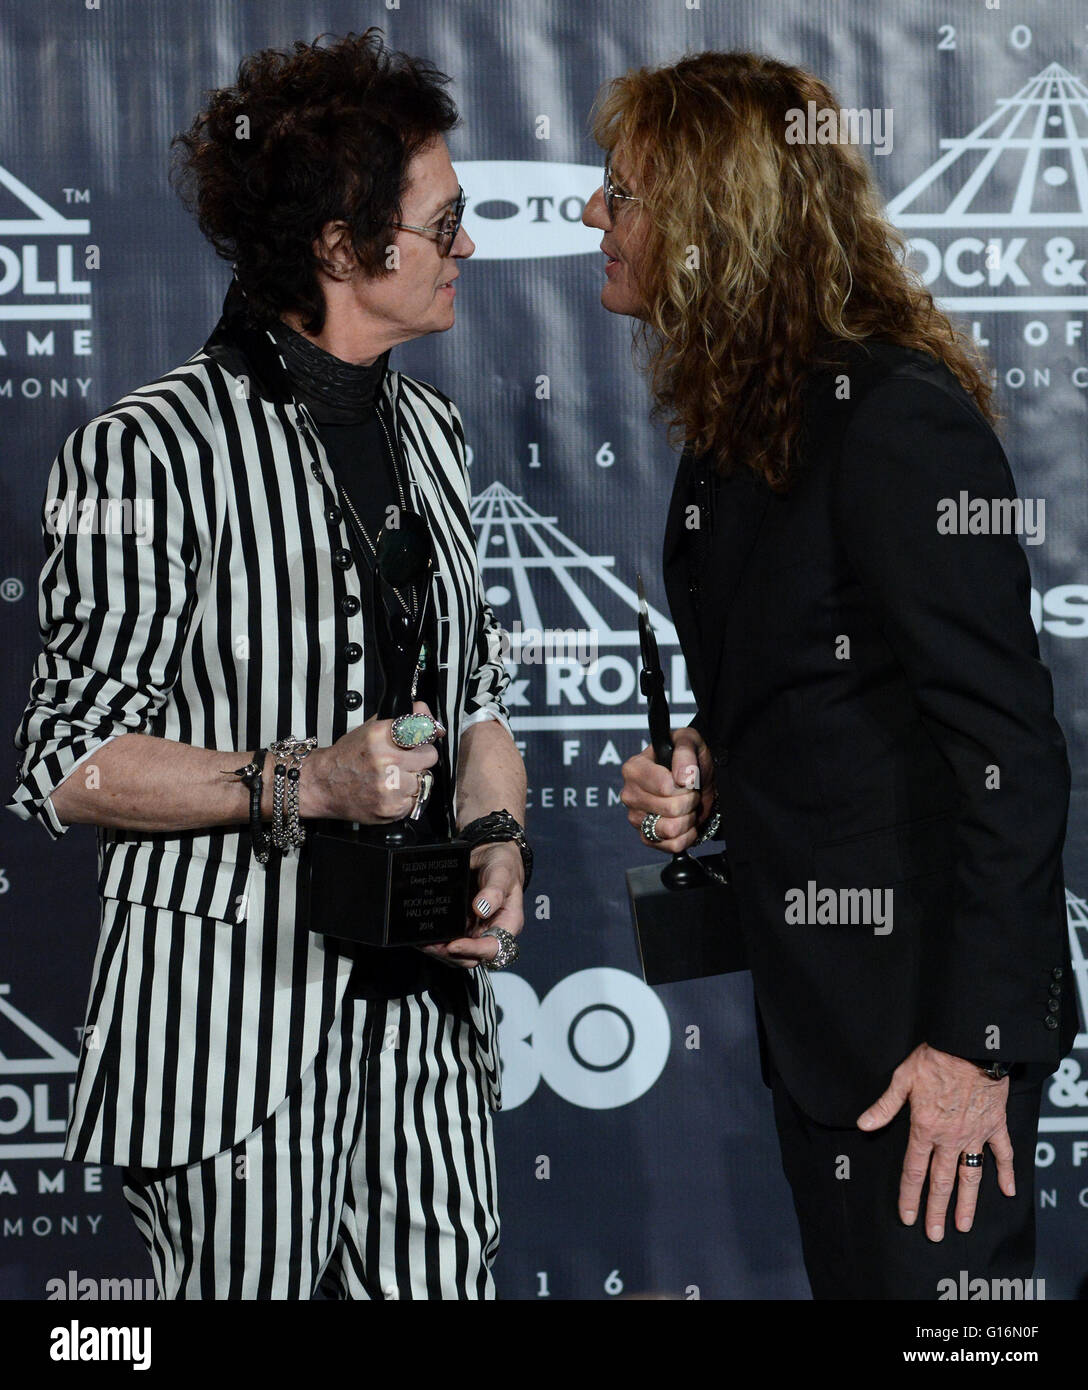 31st Annual Rock And Roll Hall Of Fame Induction Ceremony - Press Room  Featuring: Glenn Hughes, David Coverdale Where: New York, New York, United States When: 08 Apr 2016 Stock Photo